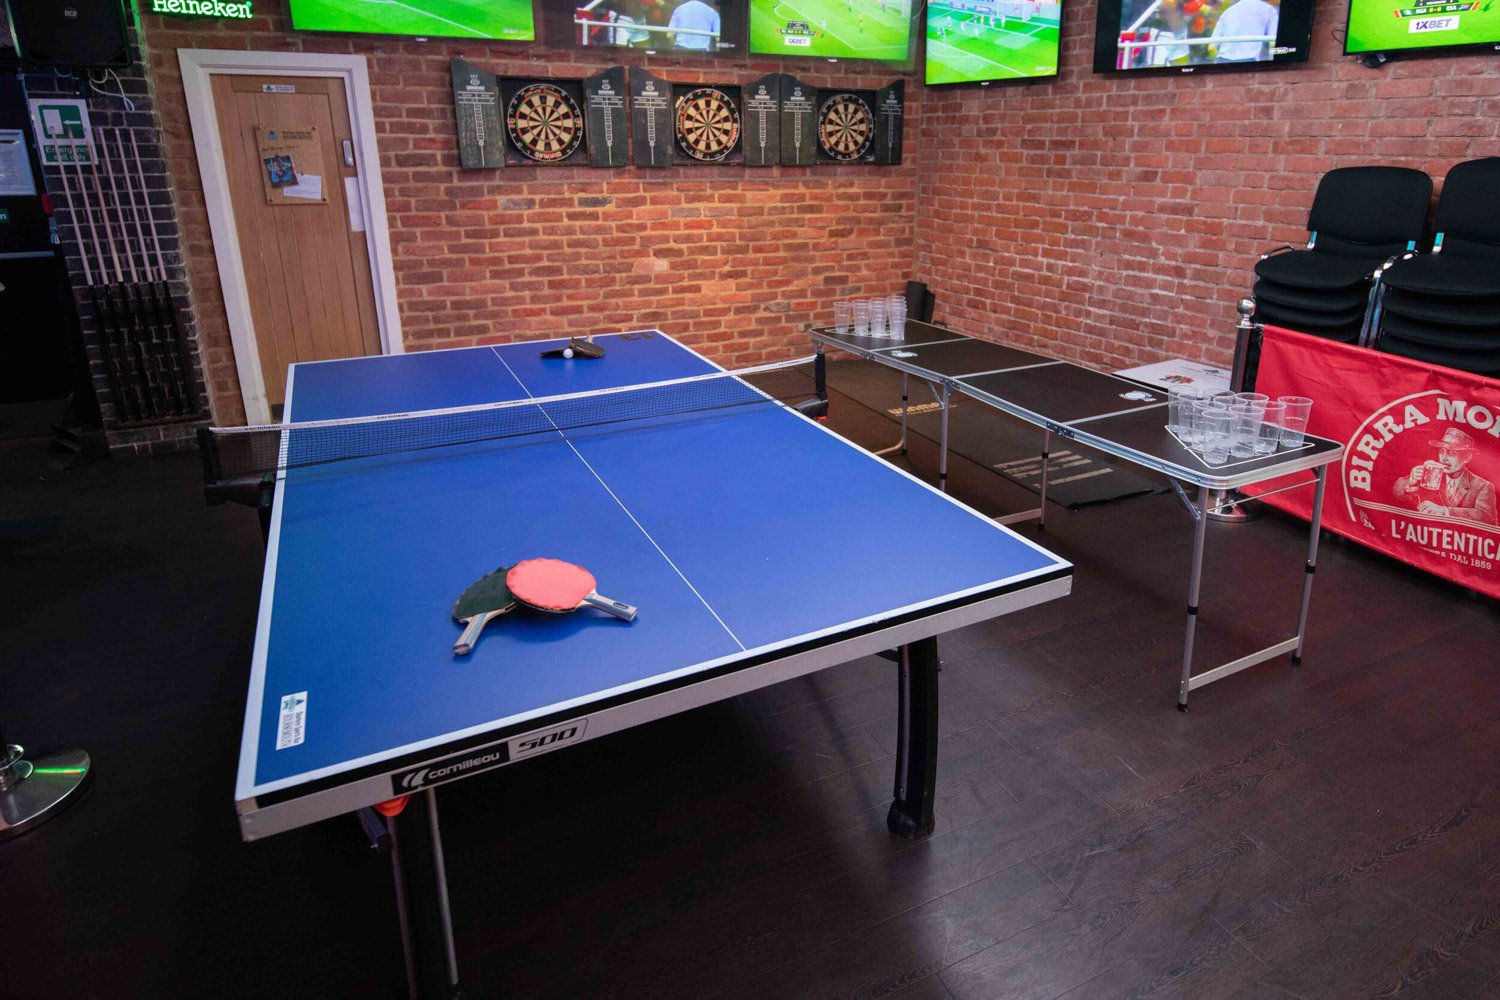 Sharkeys_Sports_Bar_Bournemouth_Live_Sports_Poole_Snooker_Table_Tennis_VIP_Rooms_Consoles-12.jpg